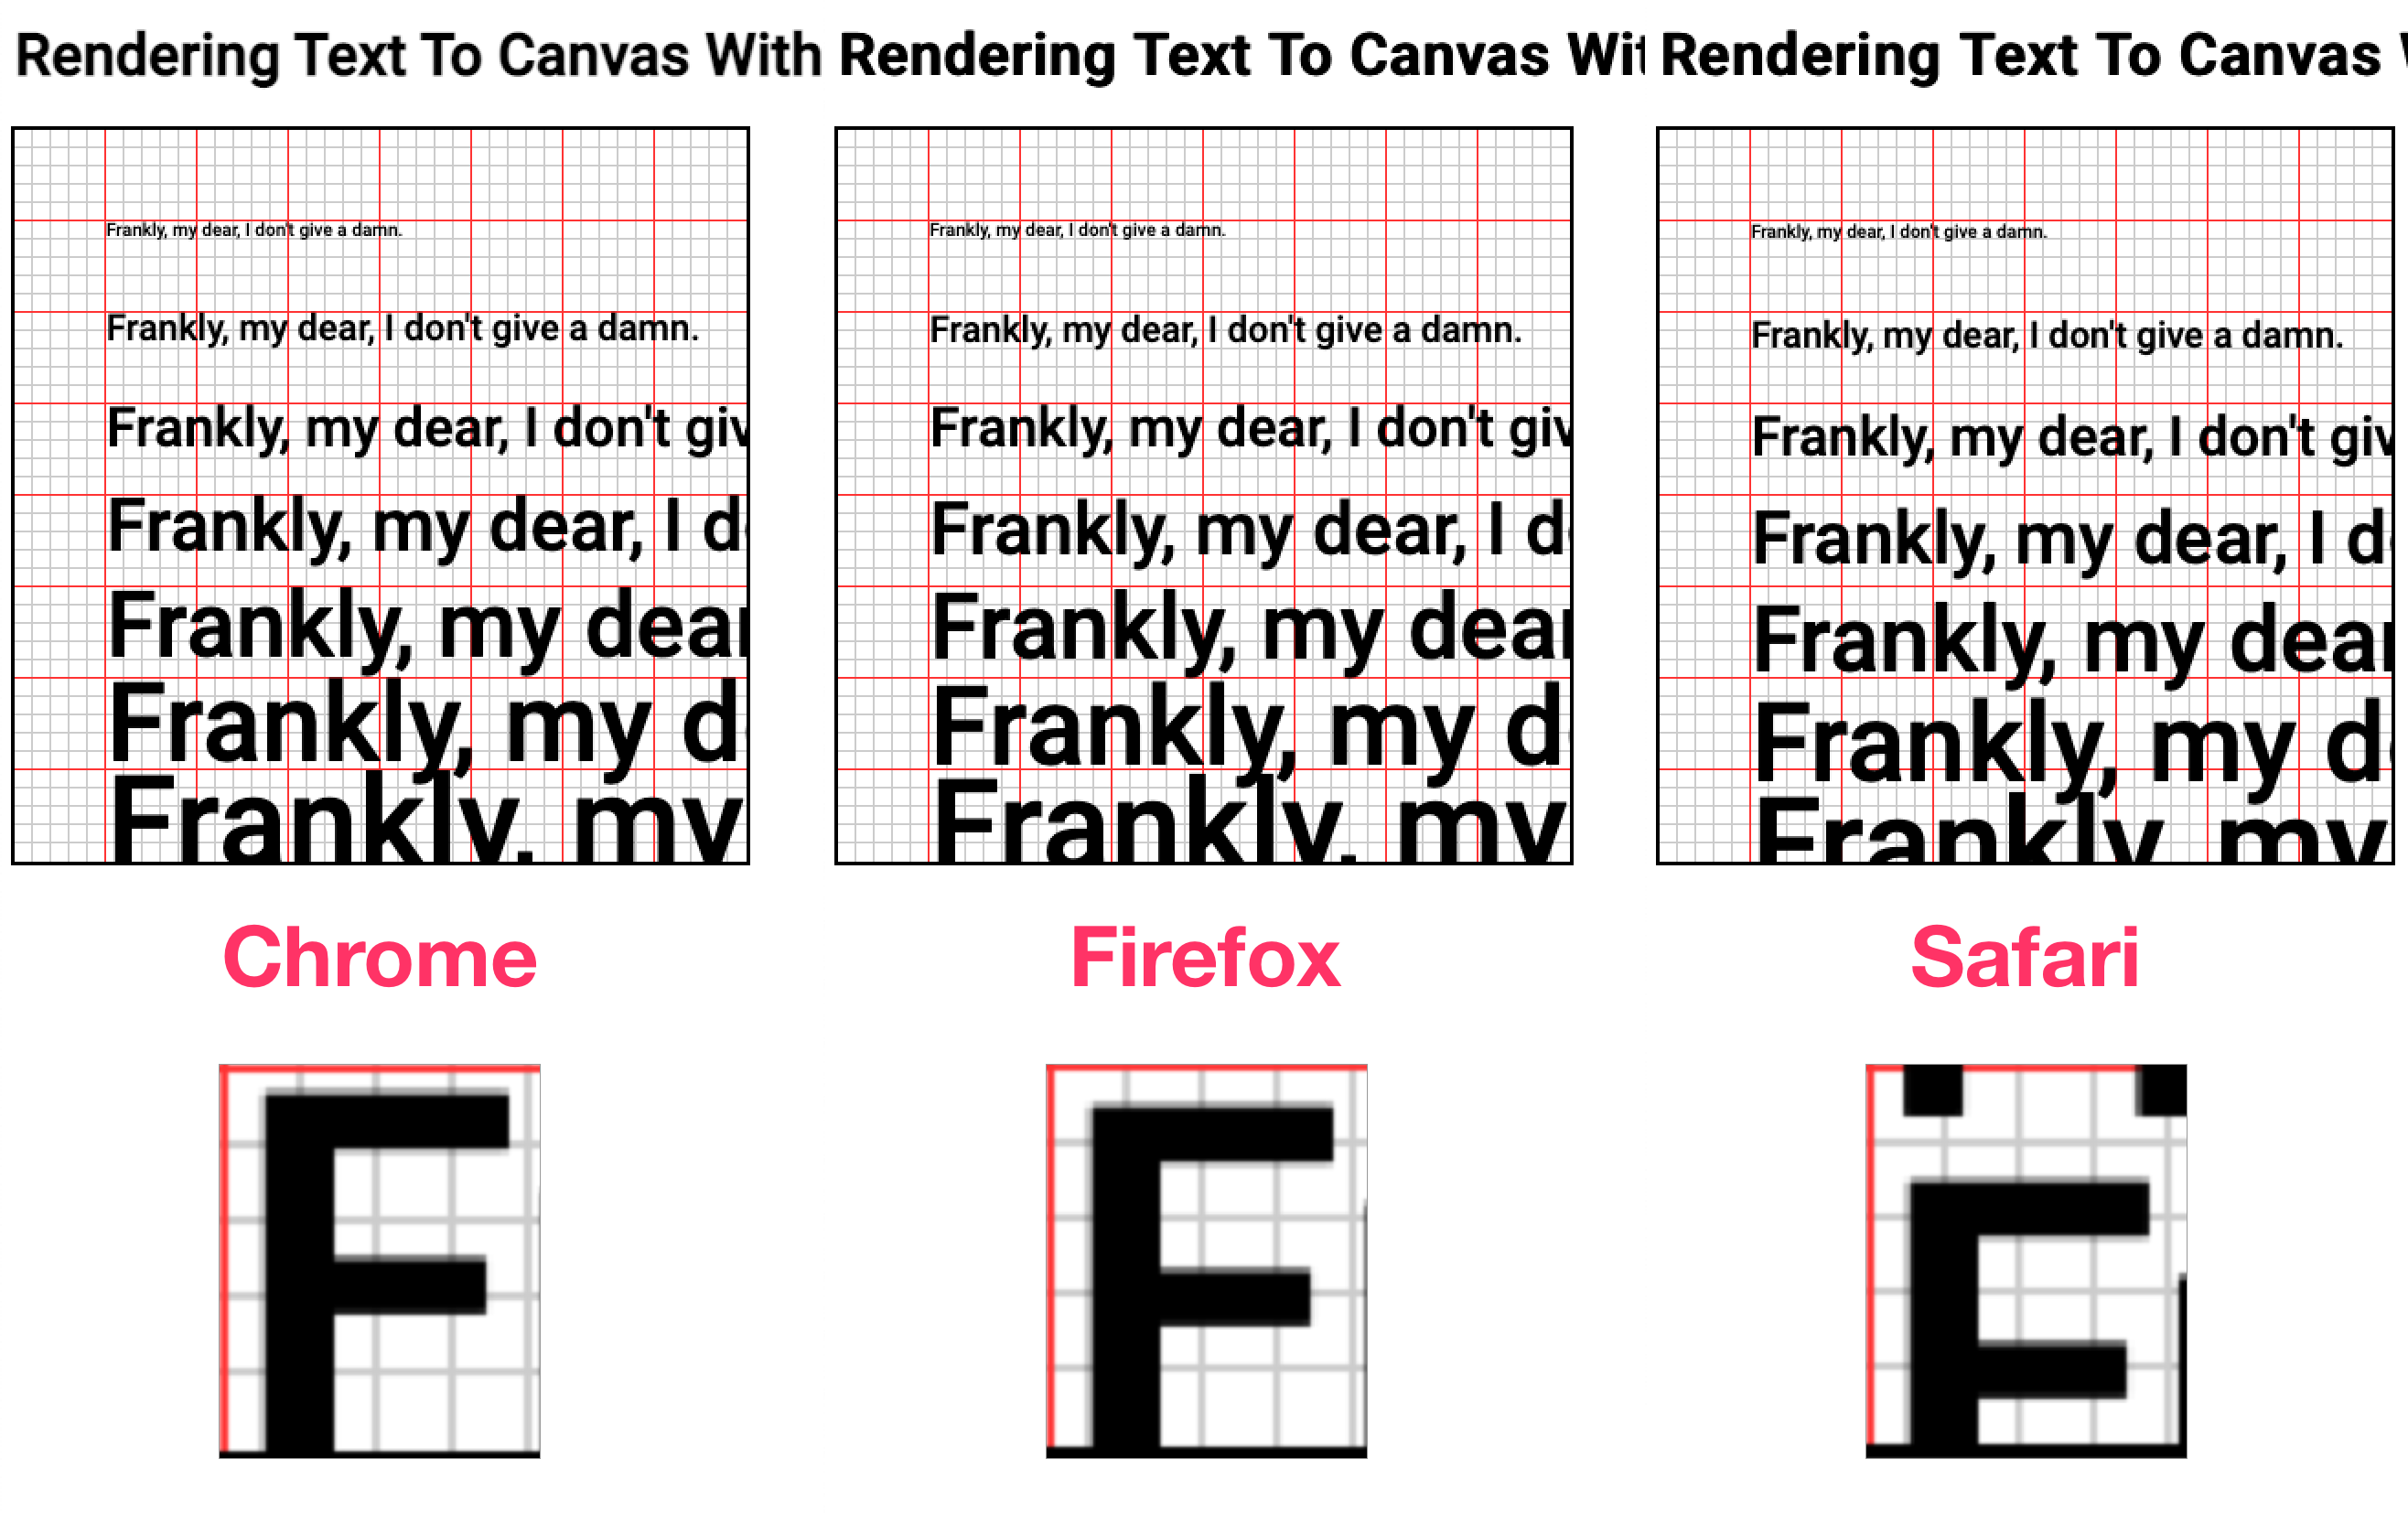 Text being rendered to Canvas on Chrome, Firefox, and Safari shows that text baselines are different in each browser.